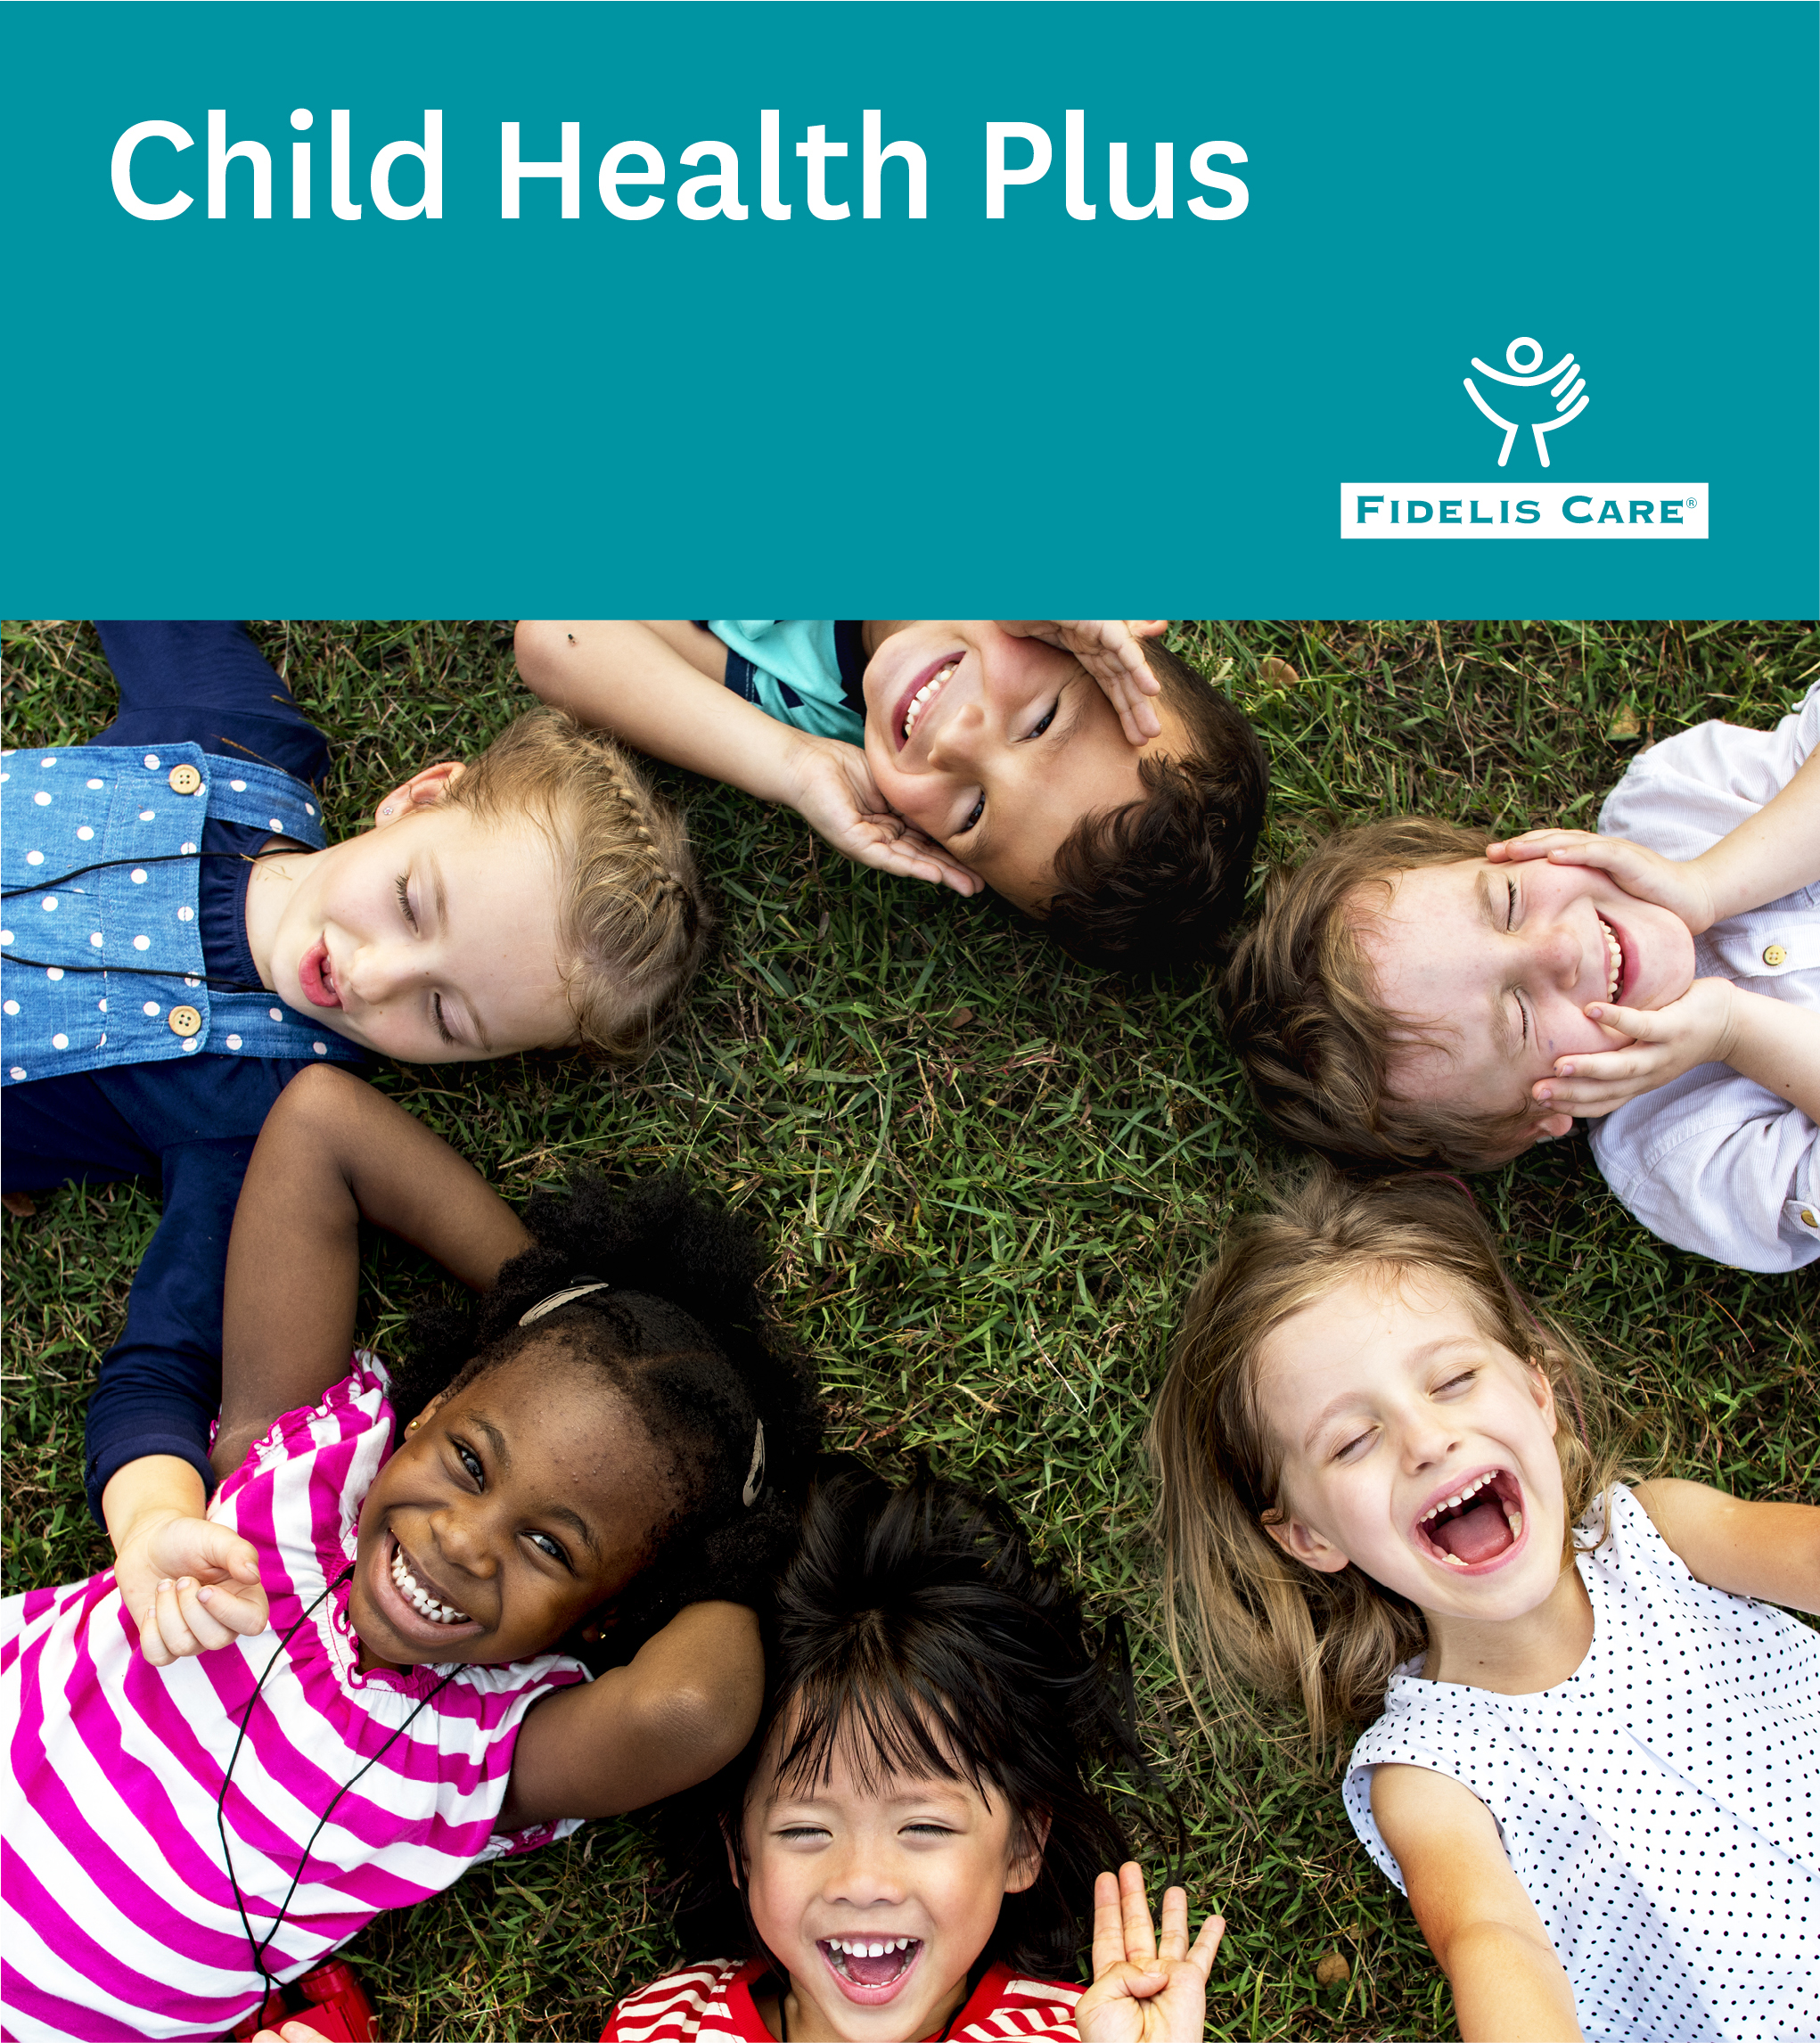 Children-Happy-Covered-by-Child-Health-Plus-NY-Insurance